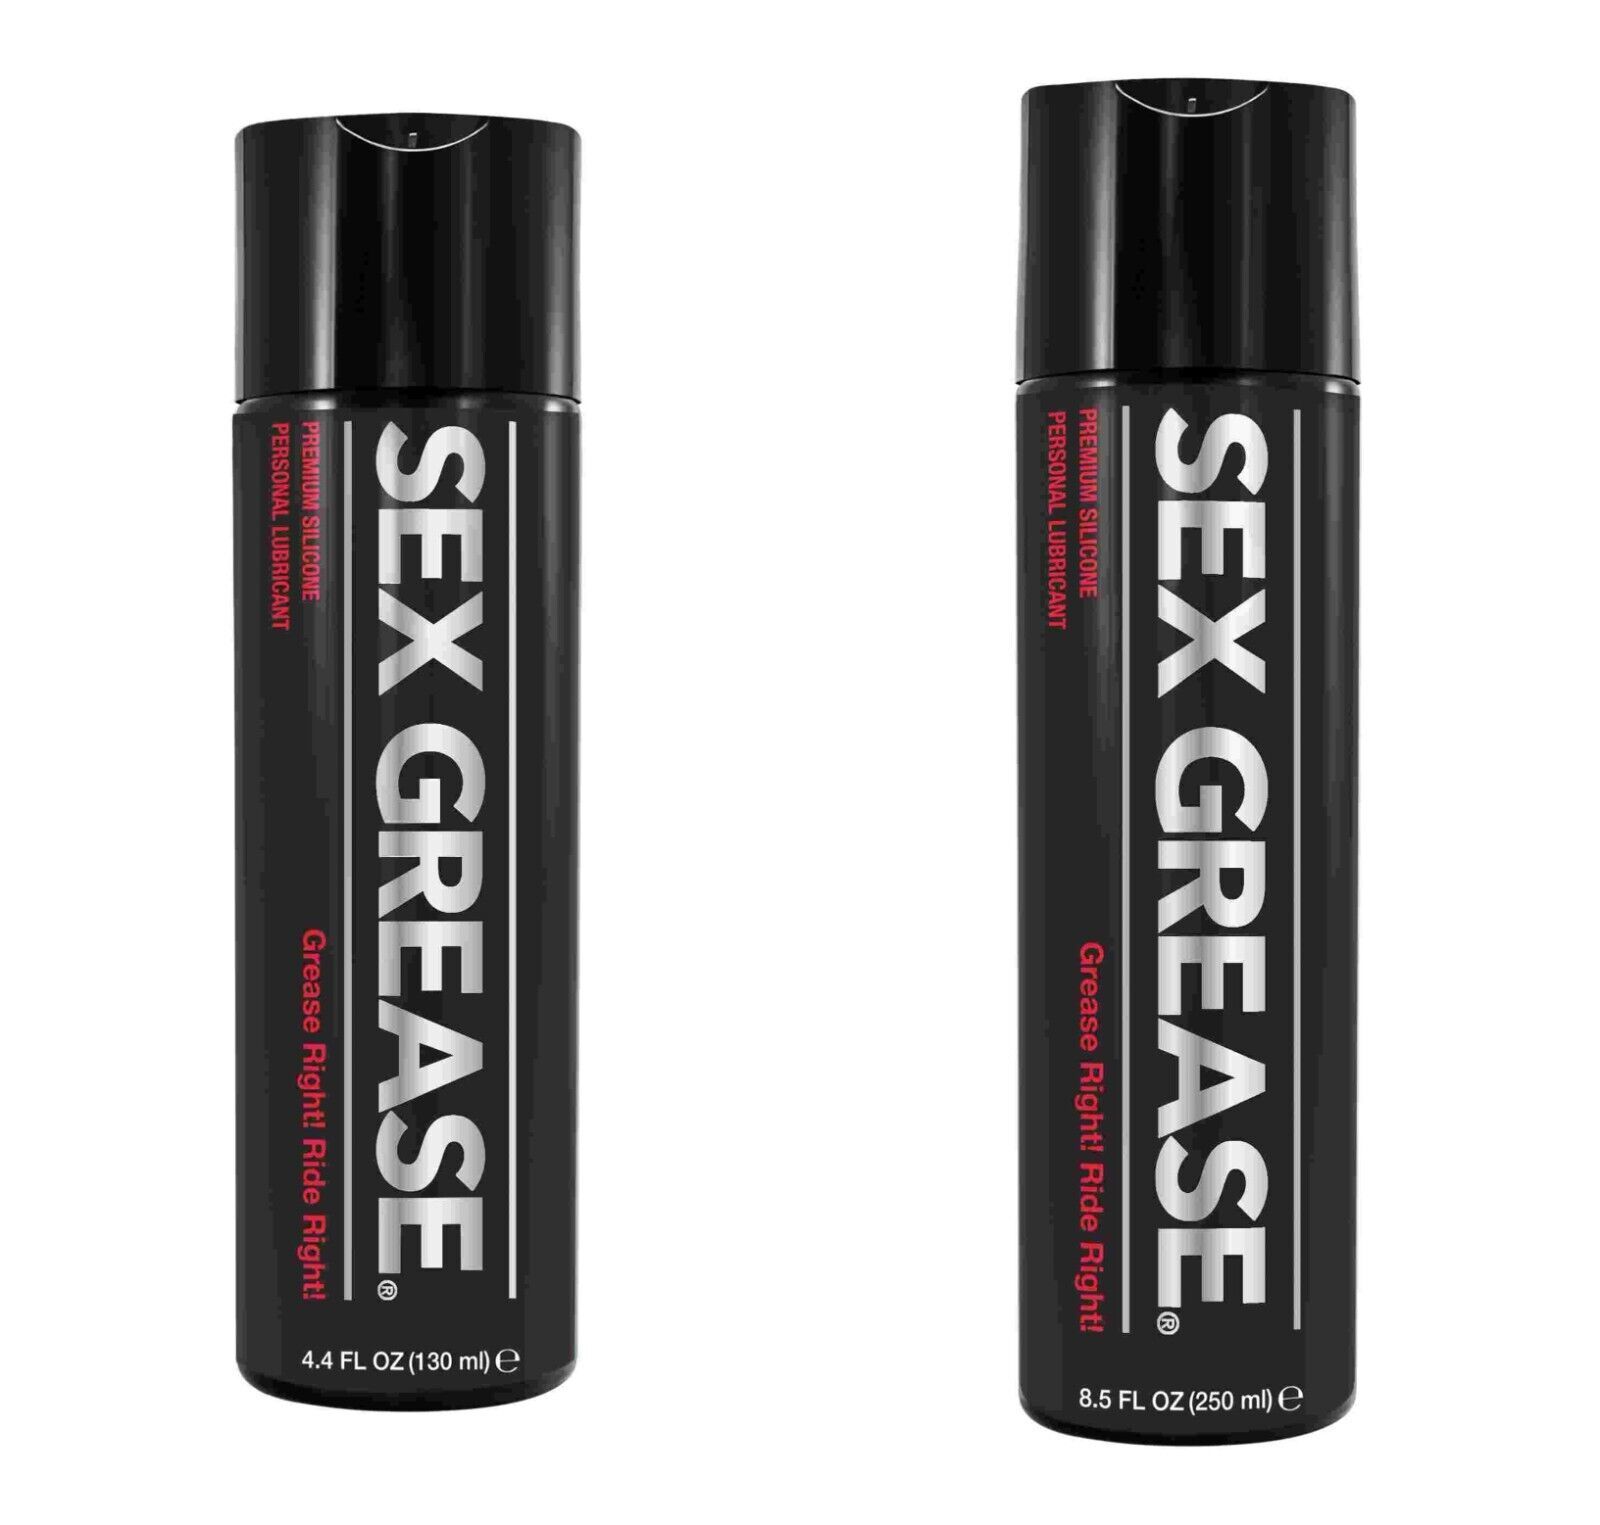 SEX GREASE ID LUBES SILICONE BASED PERSONAL LUBRICANT - $23.51 - $36.25